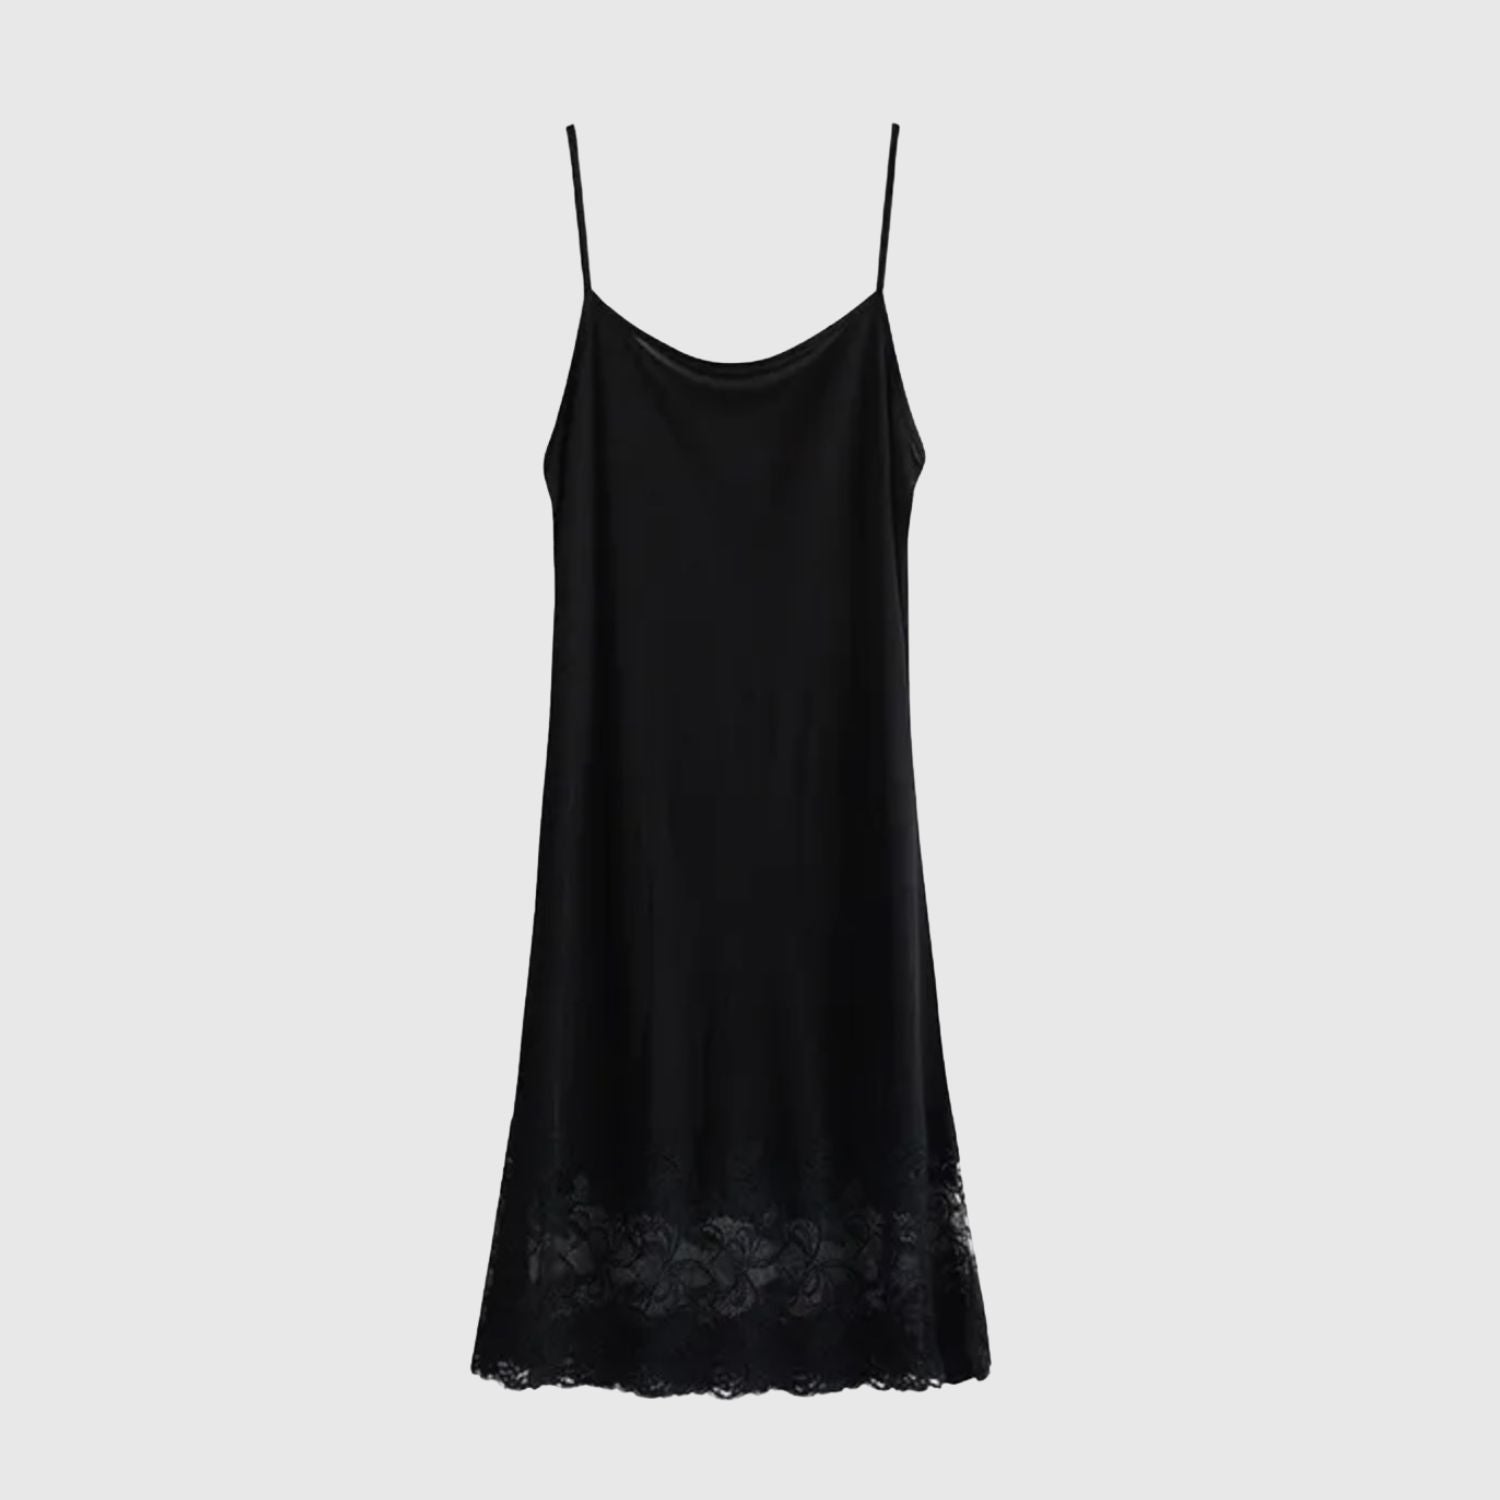 Silk Slip Dress with lace hem  Shop 100% Silk lingerie from Canada –  econica